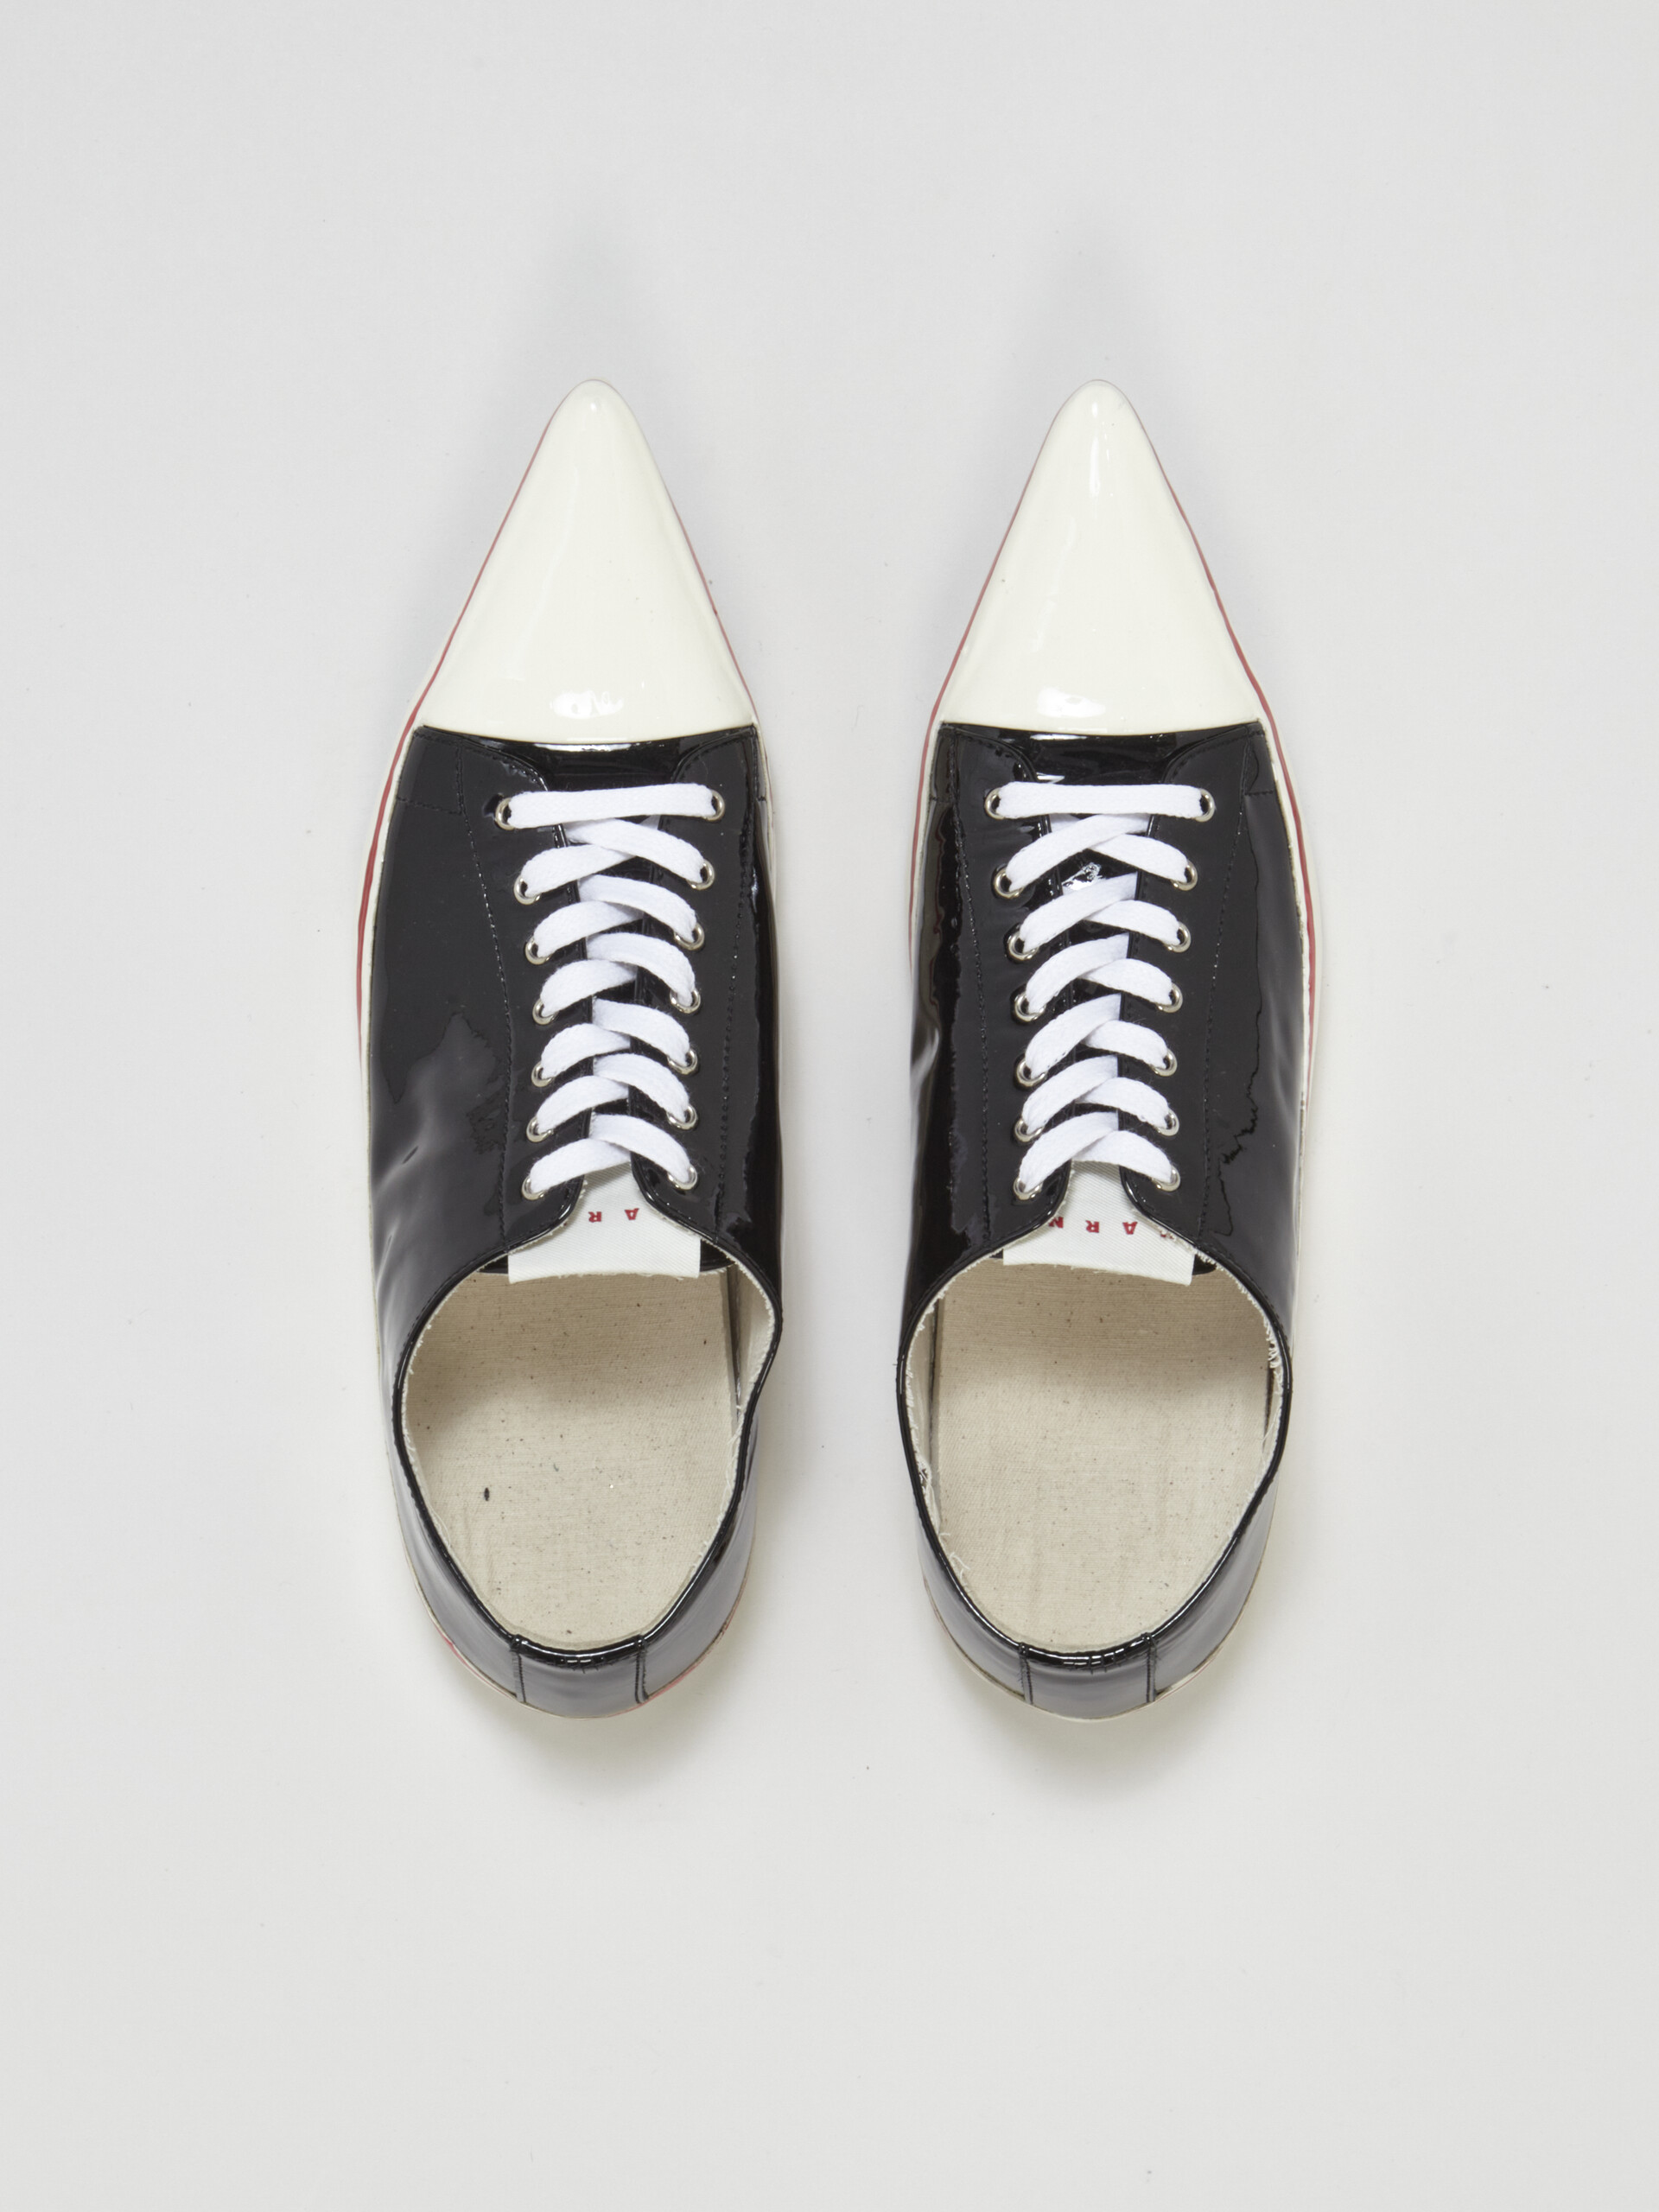 Patent leather GOOEY low-top sneaker w/Marni graffiti-style signature - Sneakers - Image 4